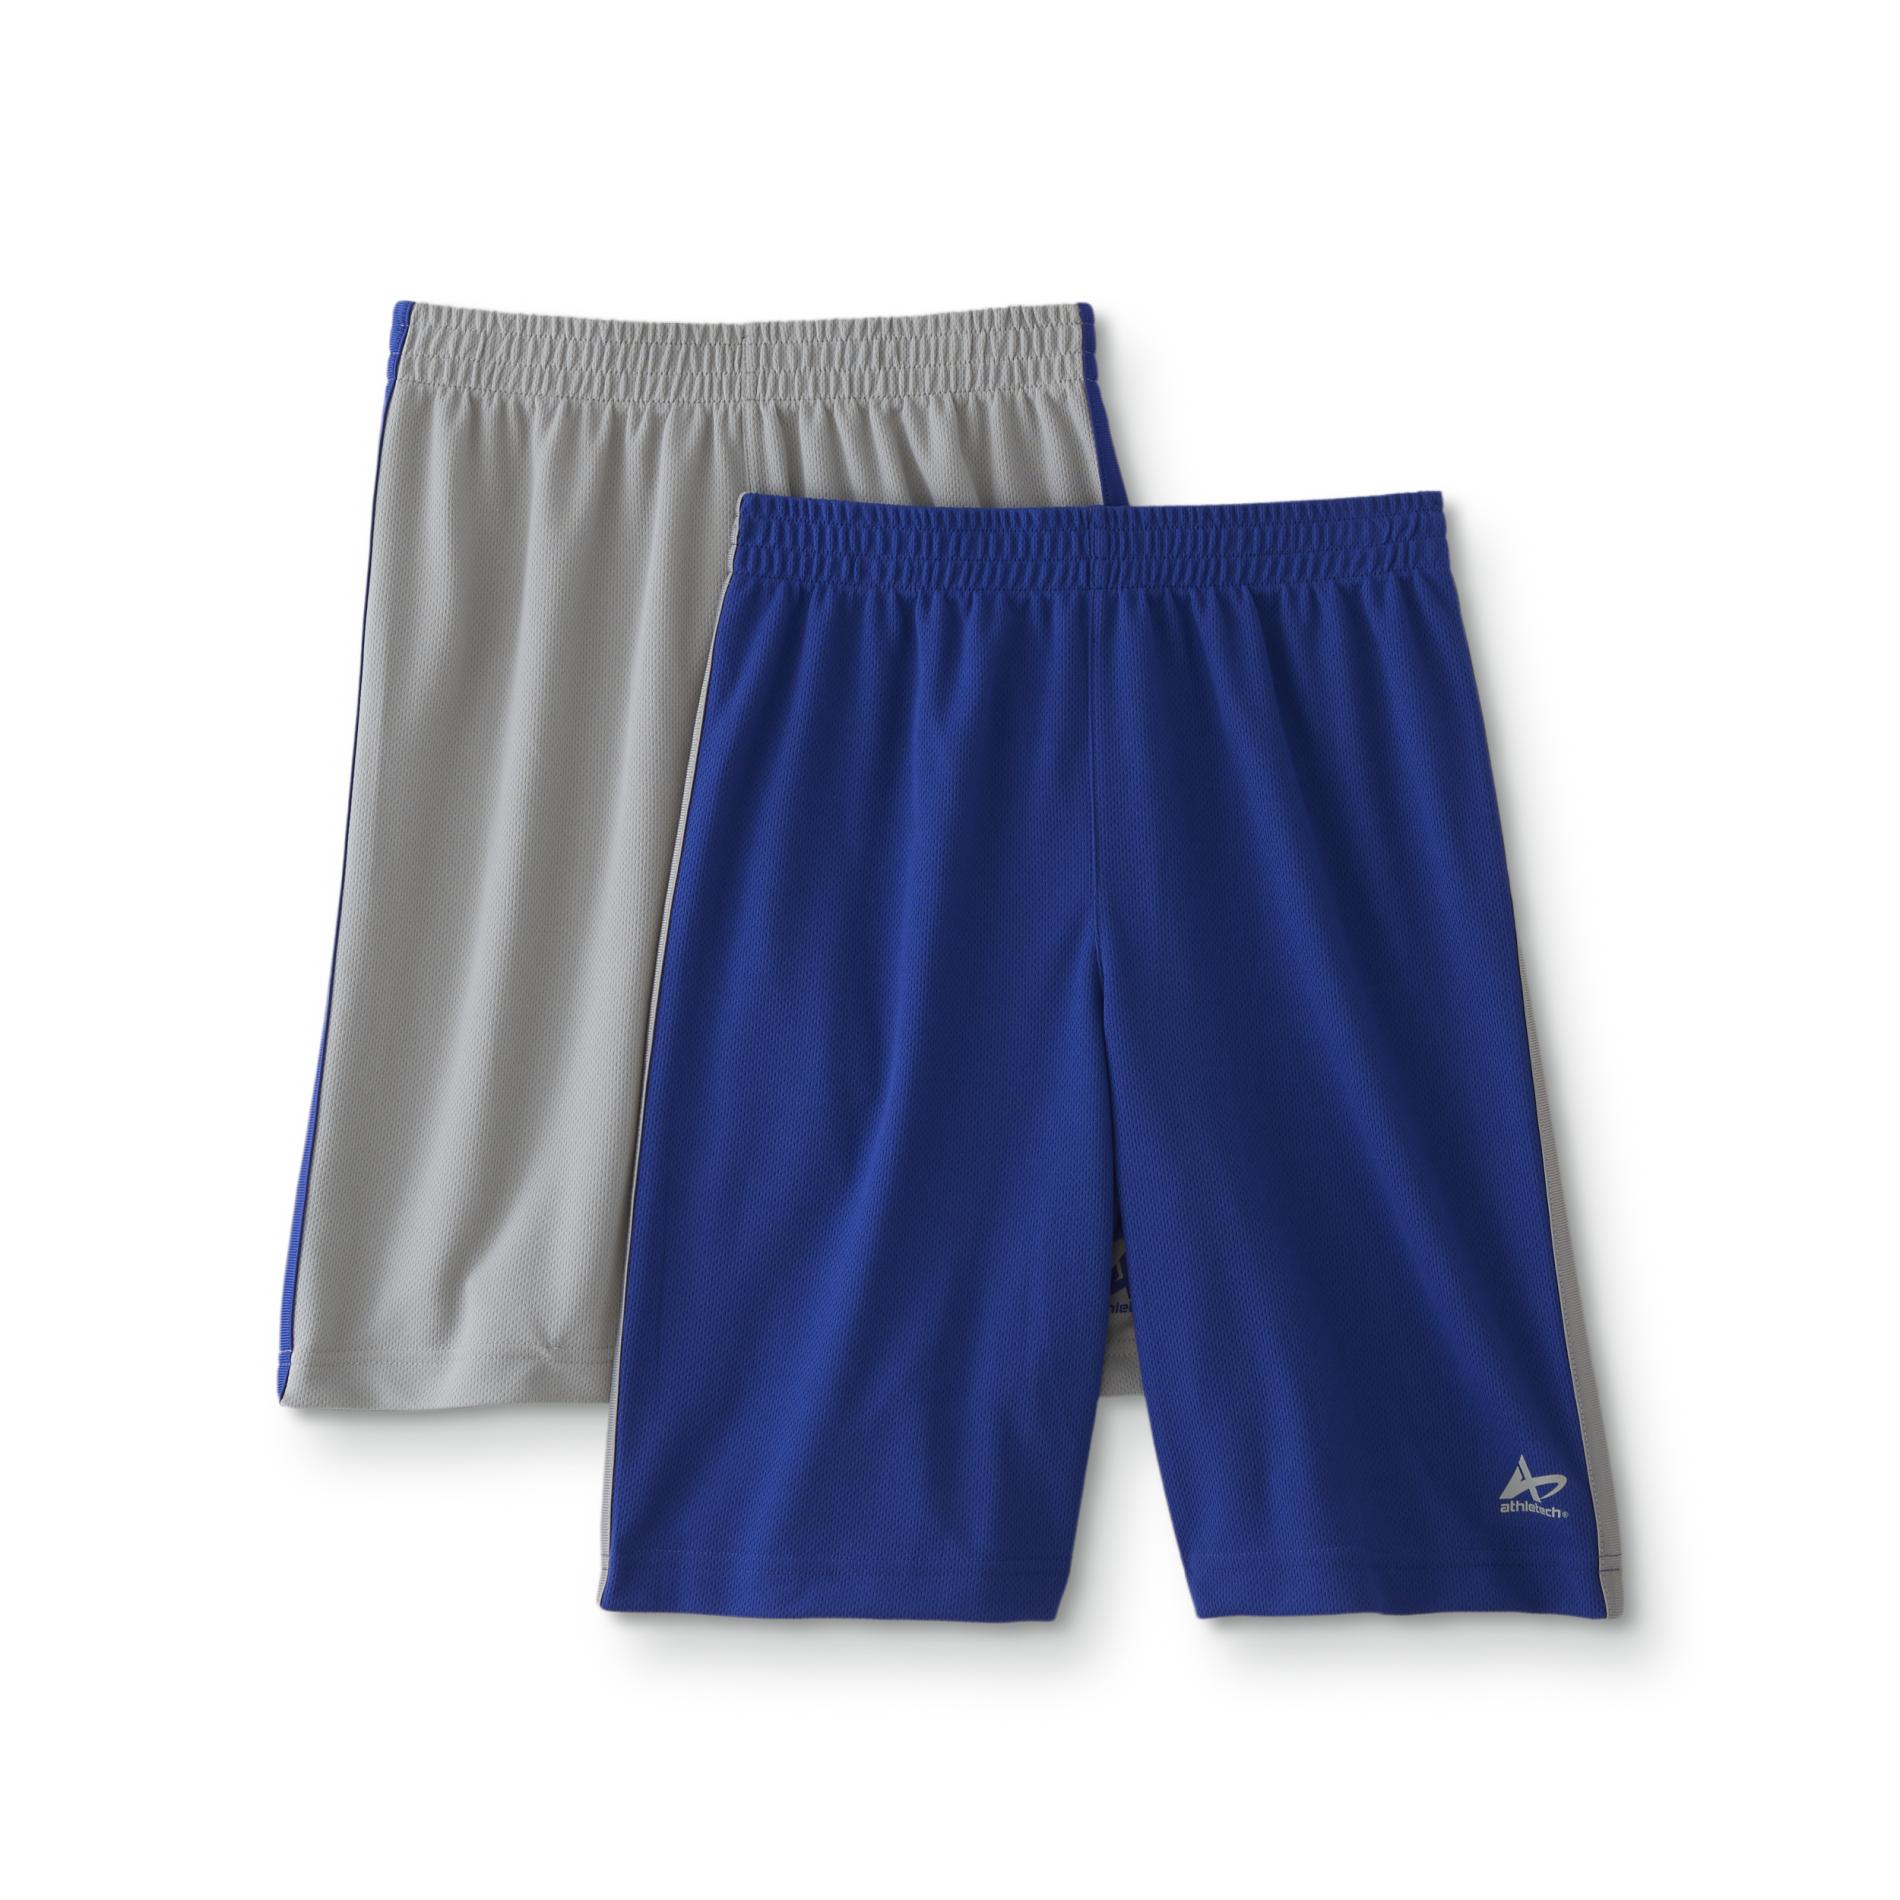 Athletech Boys' 2-Pack Athletic Shorts - Striped